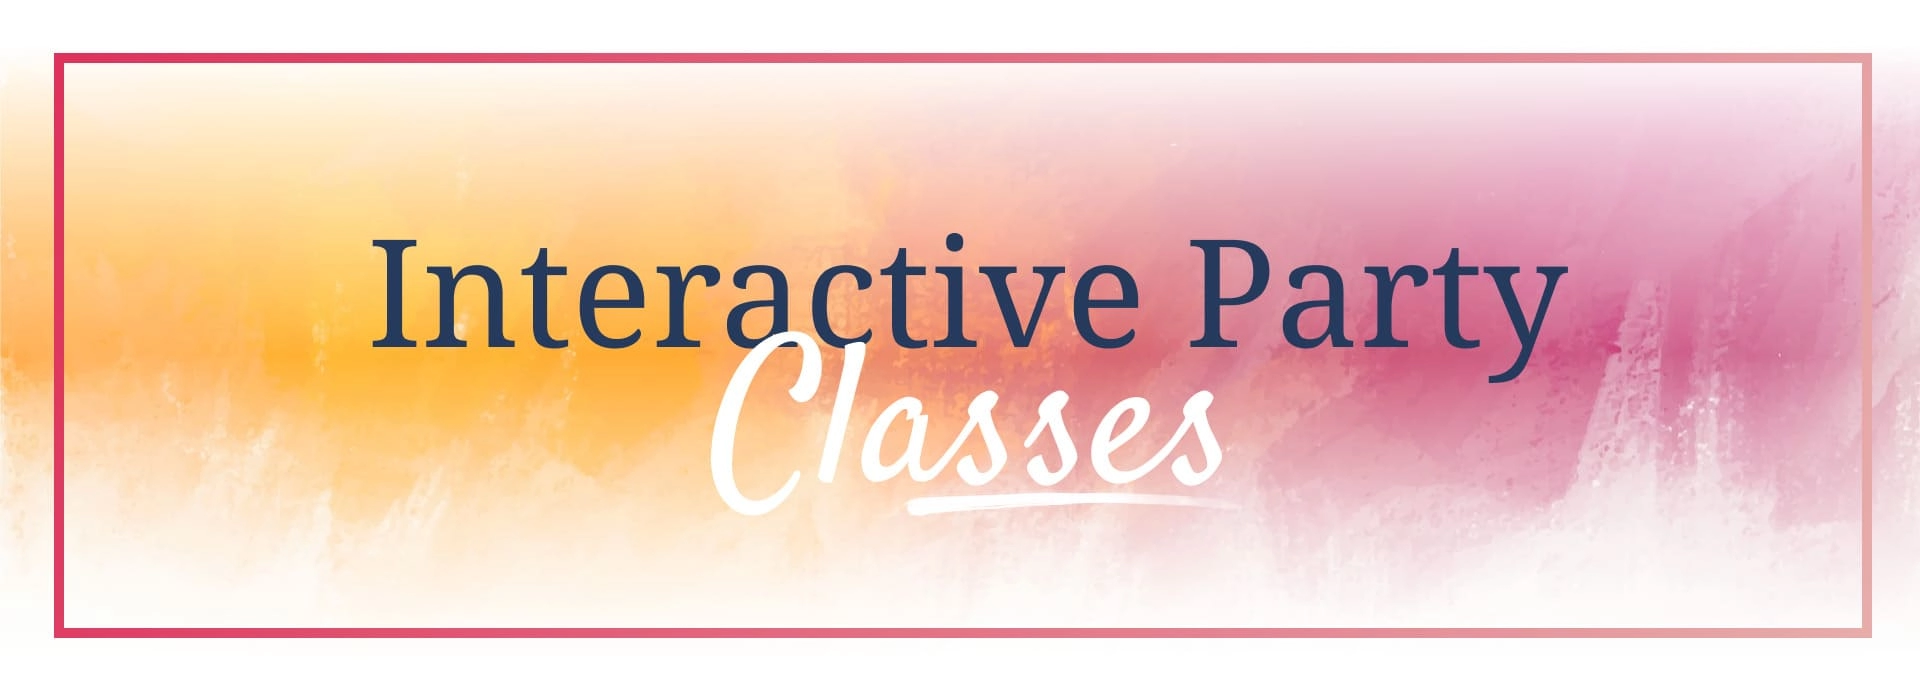 Interactive Party Classes